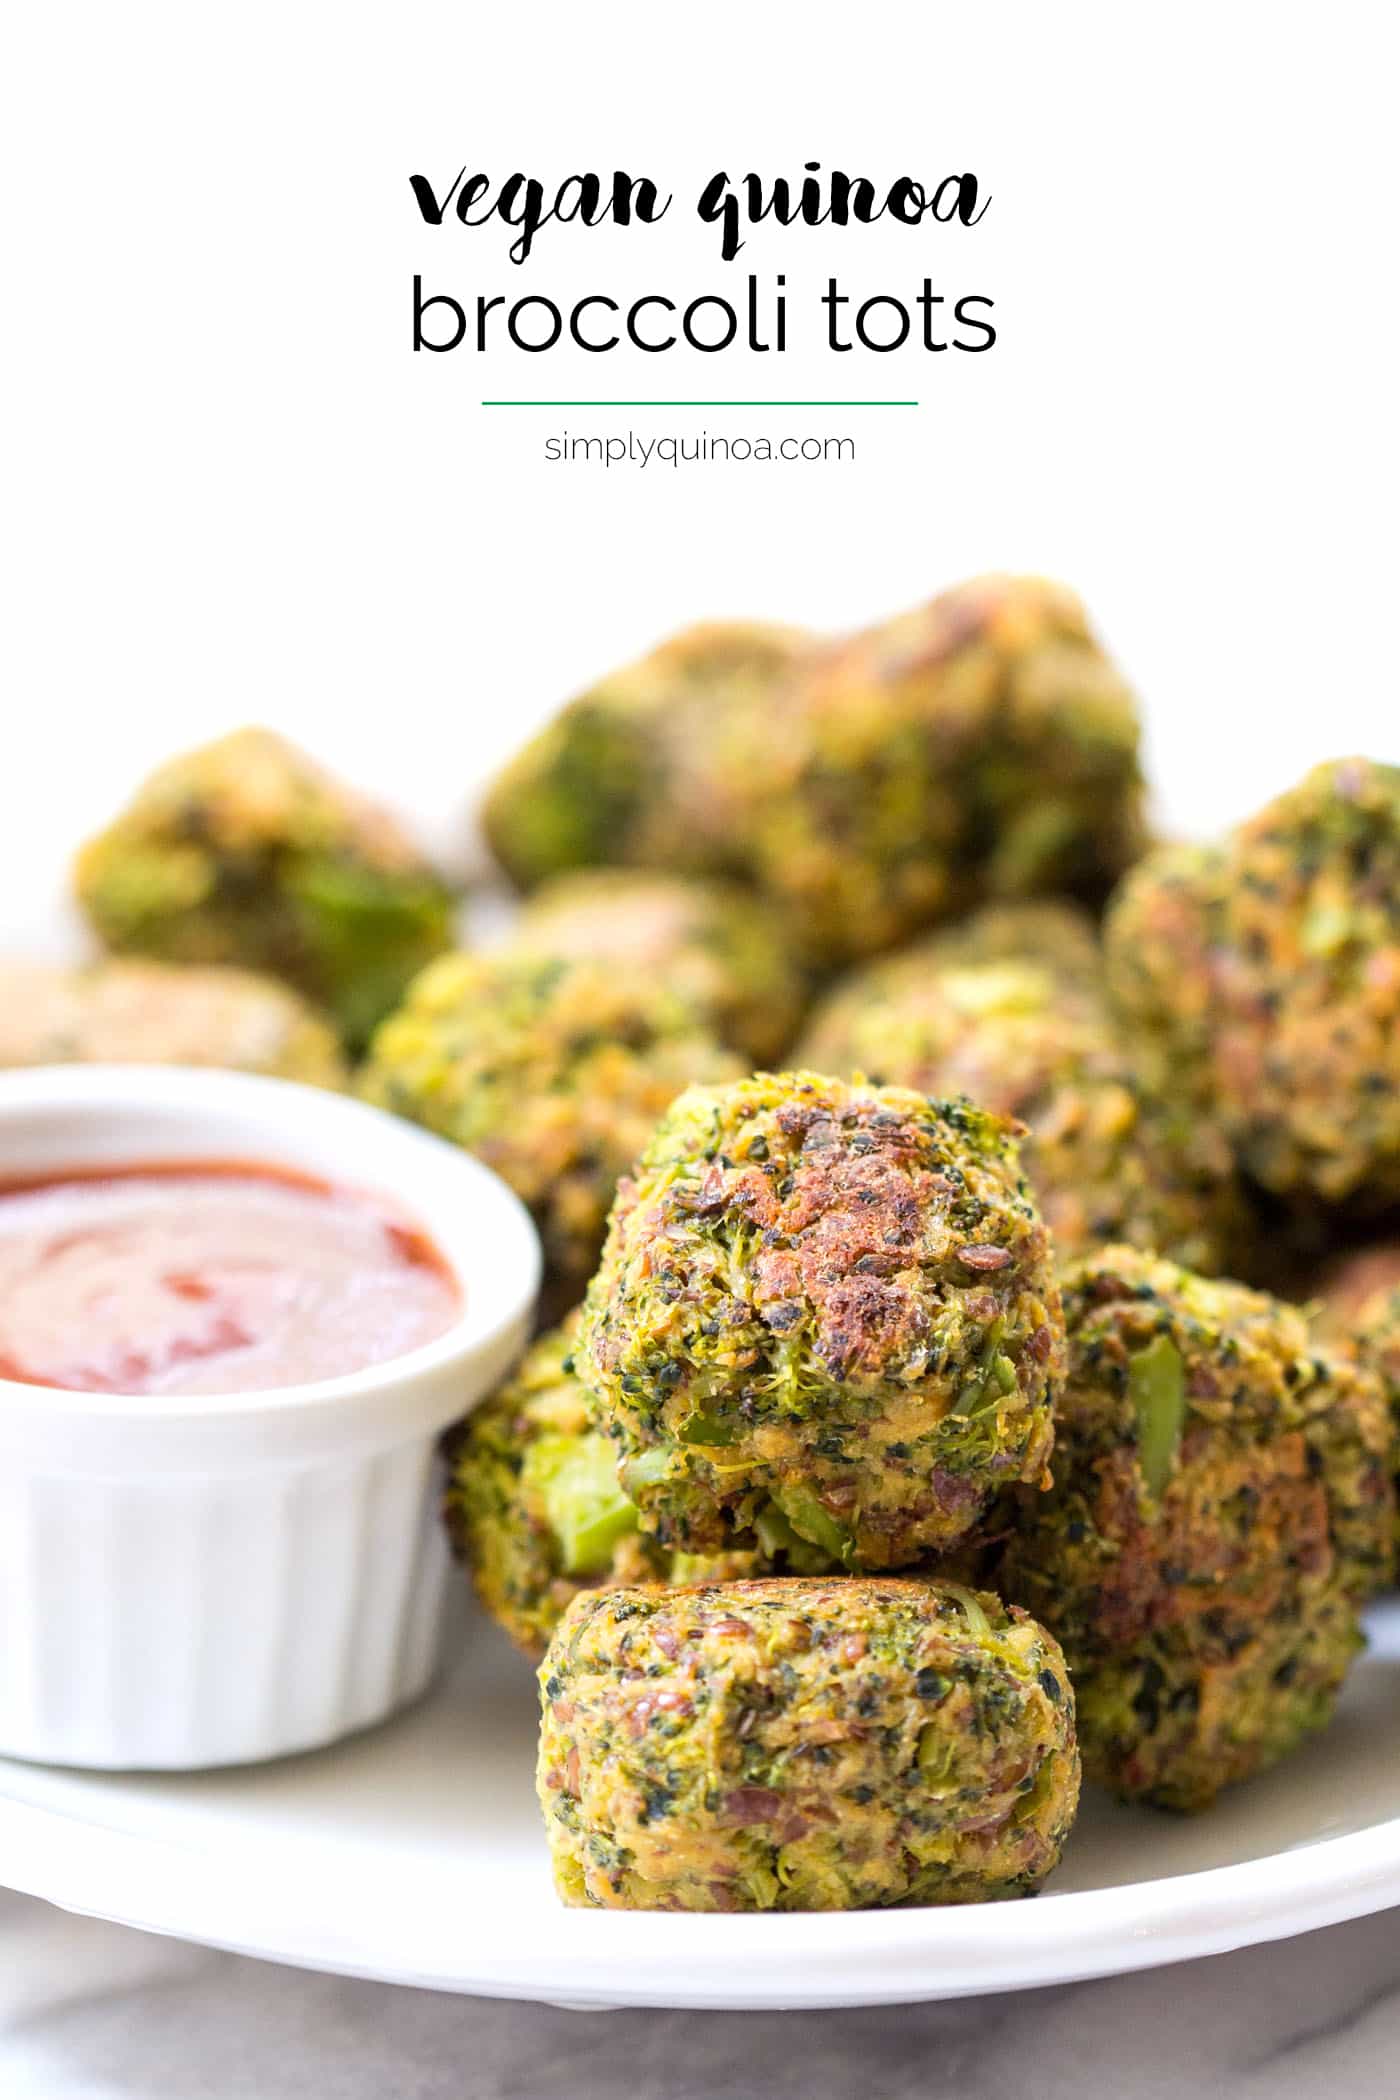 Vegan Quinoa Broccoli Tots -- the new way to eat broccoli! Simple to make, delicious and healthy too!